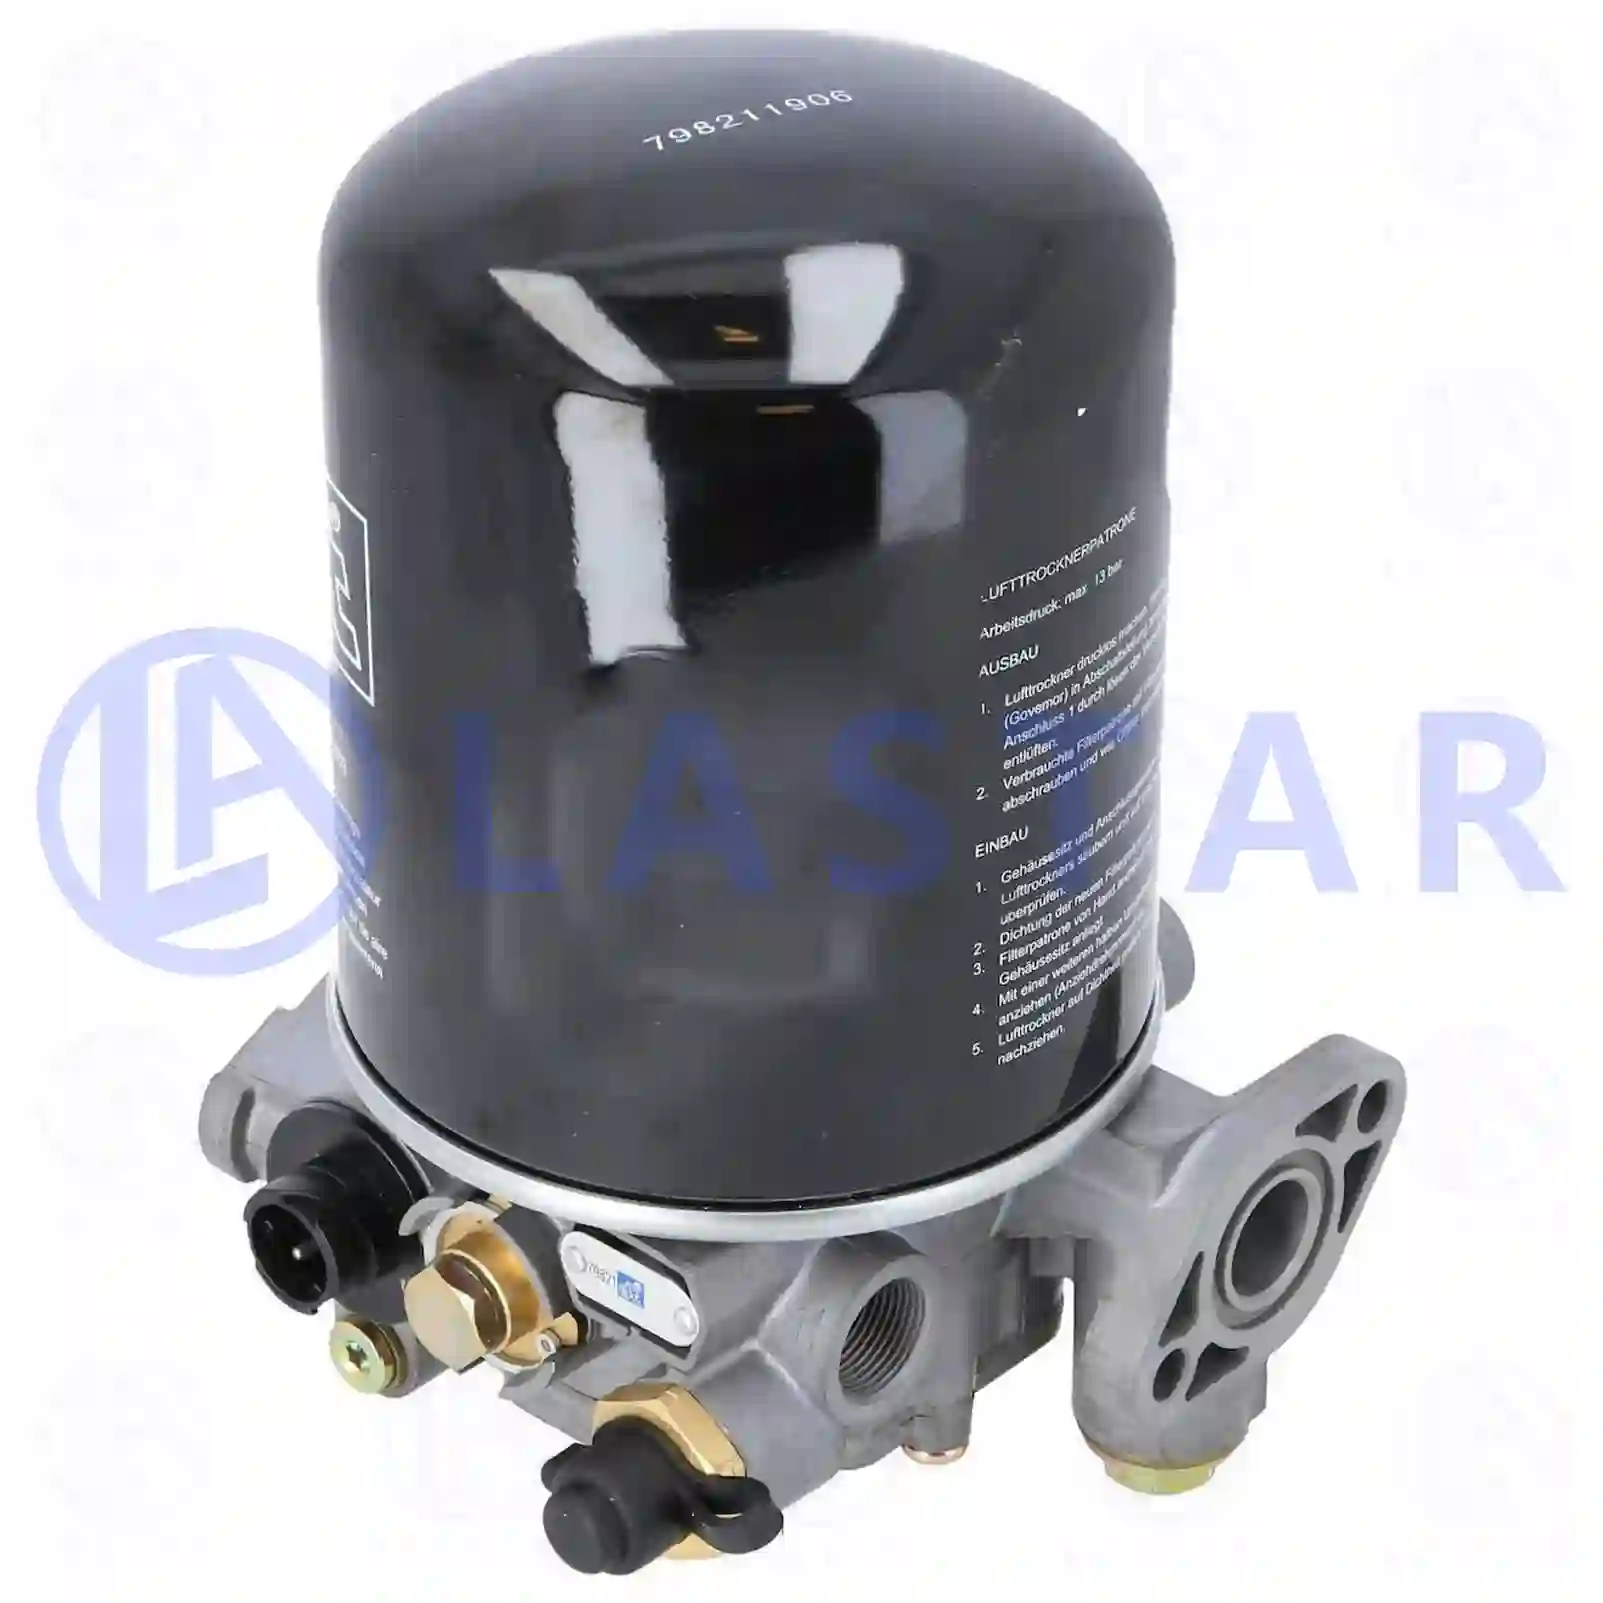 Air dryer, with heating unit, 77715146, 4309715 ||  77715146 Lastar Spare Part | Truck Spare Parts, Auotomotive Spare Parts Air dryer, with heating unit, 77715146, 4309715 ||  77715146 Lastar Spare Part | Truck Spare Parts, Auotomotive Spare Parts